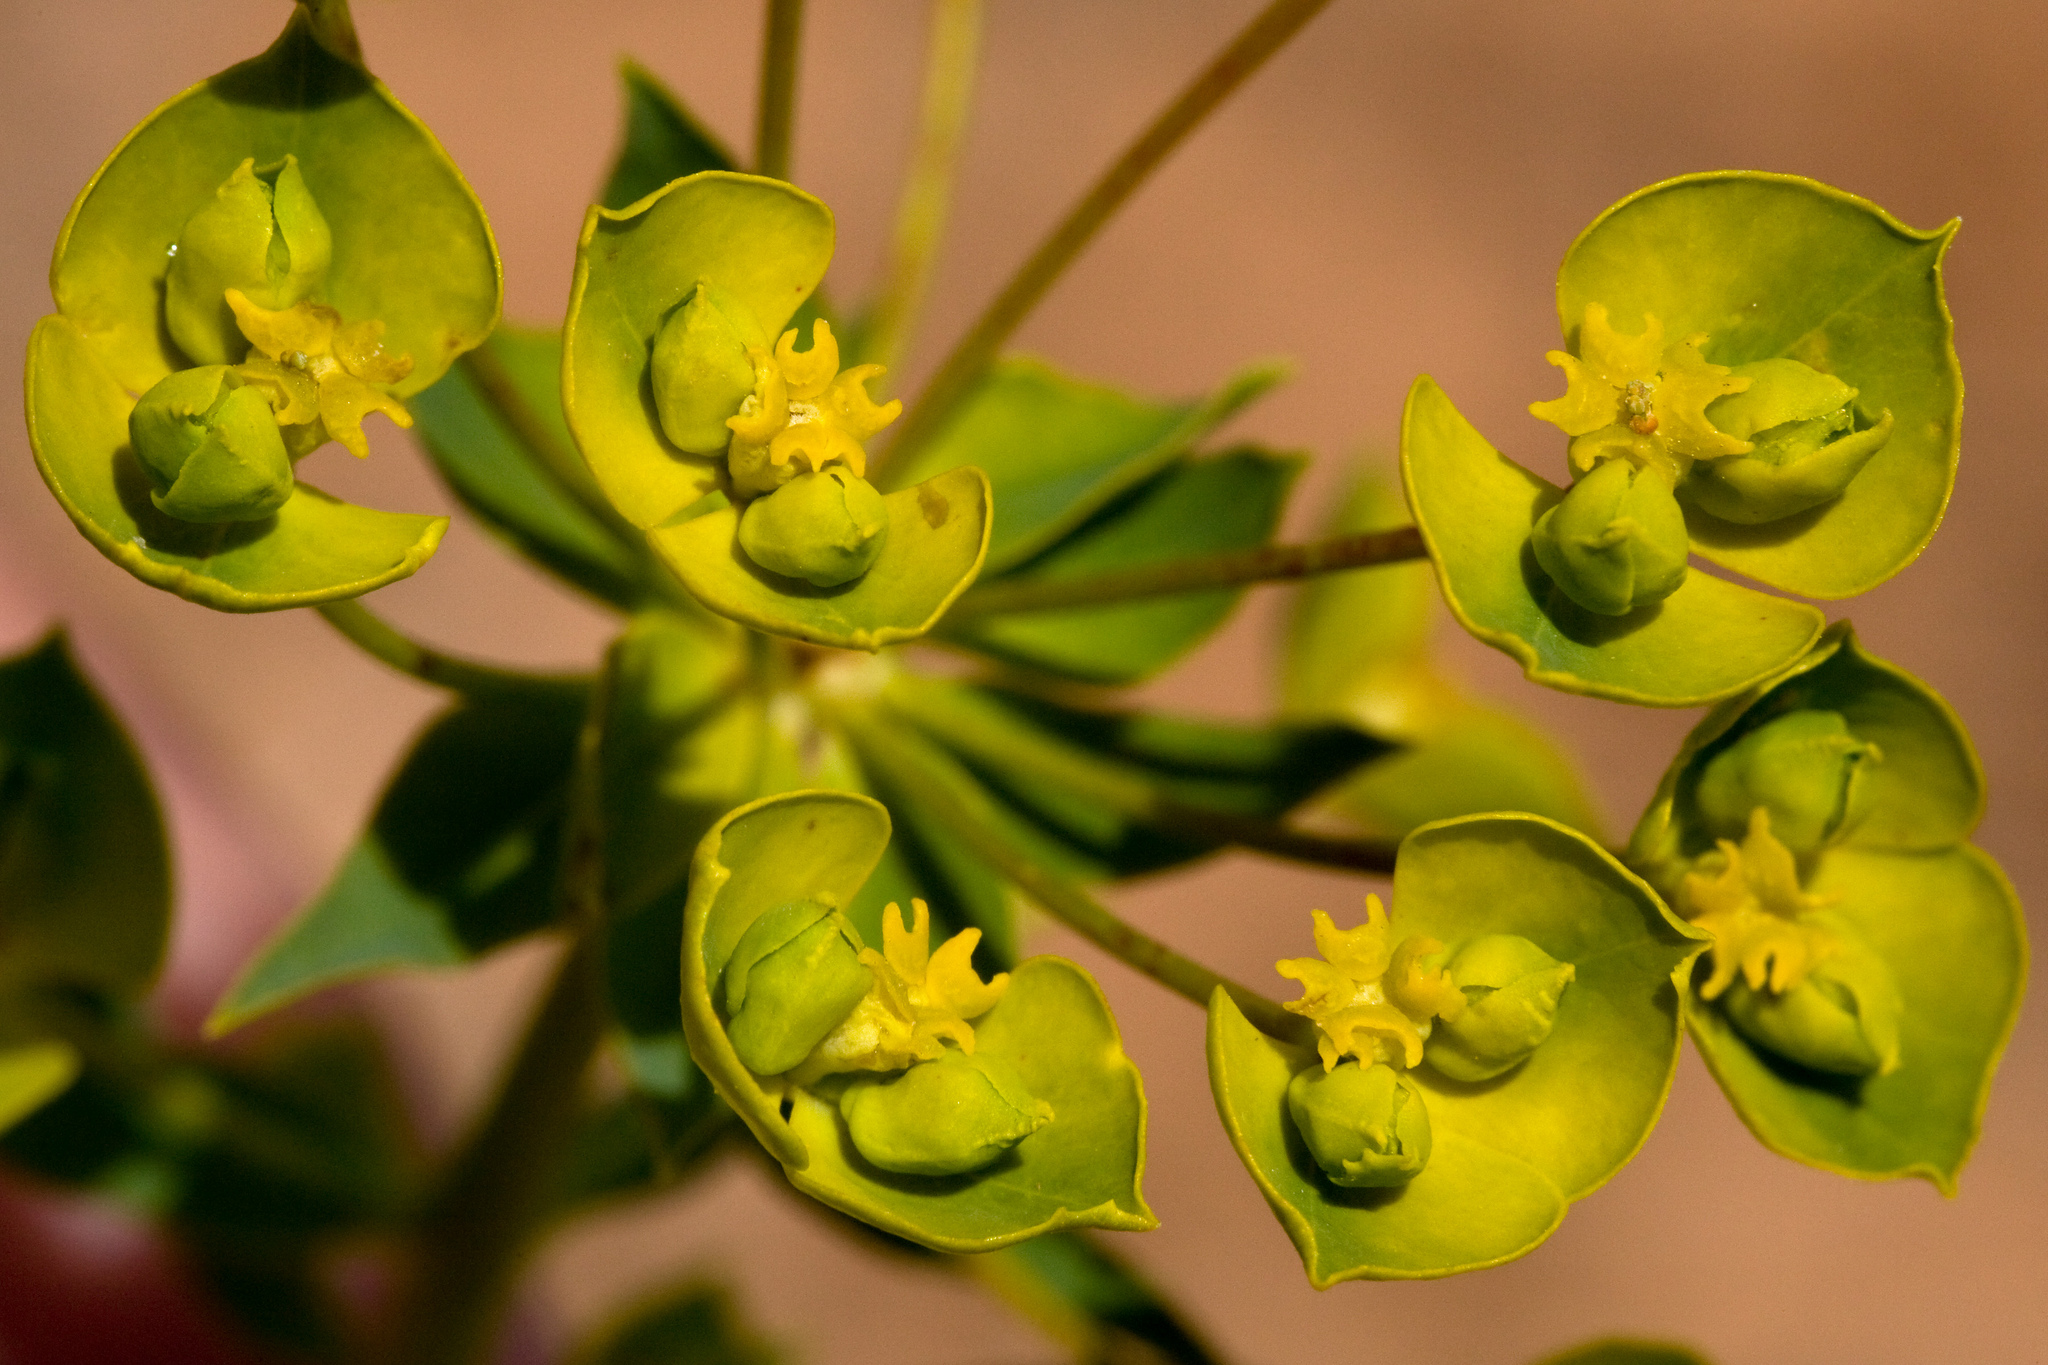 Small yellow flowers with fan-shaped bracts surrounding them